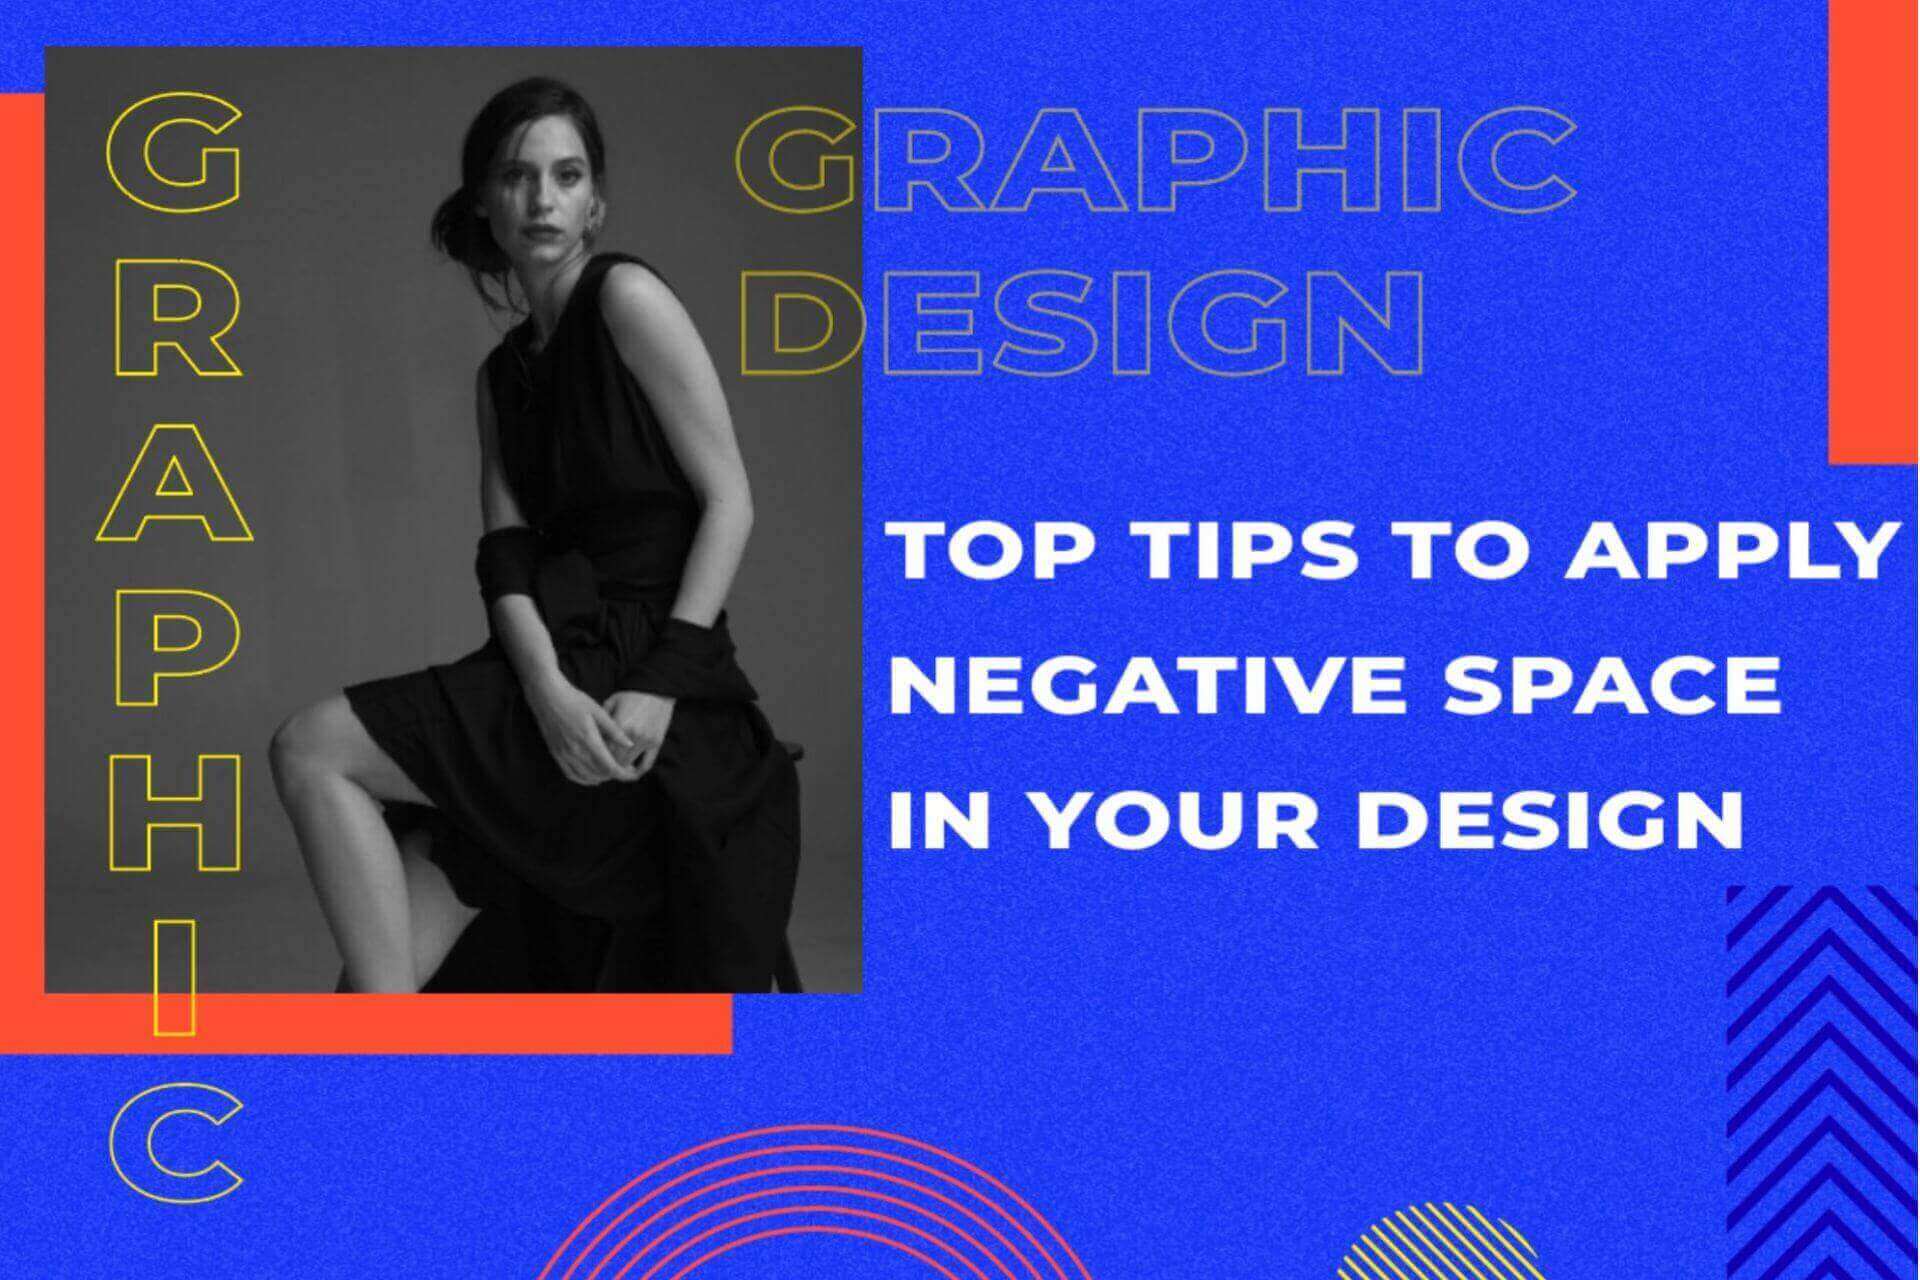 Graphic Design Principles: Top Tips to Apply Negative Space in Your Design